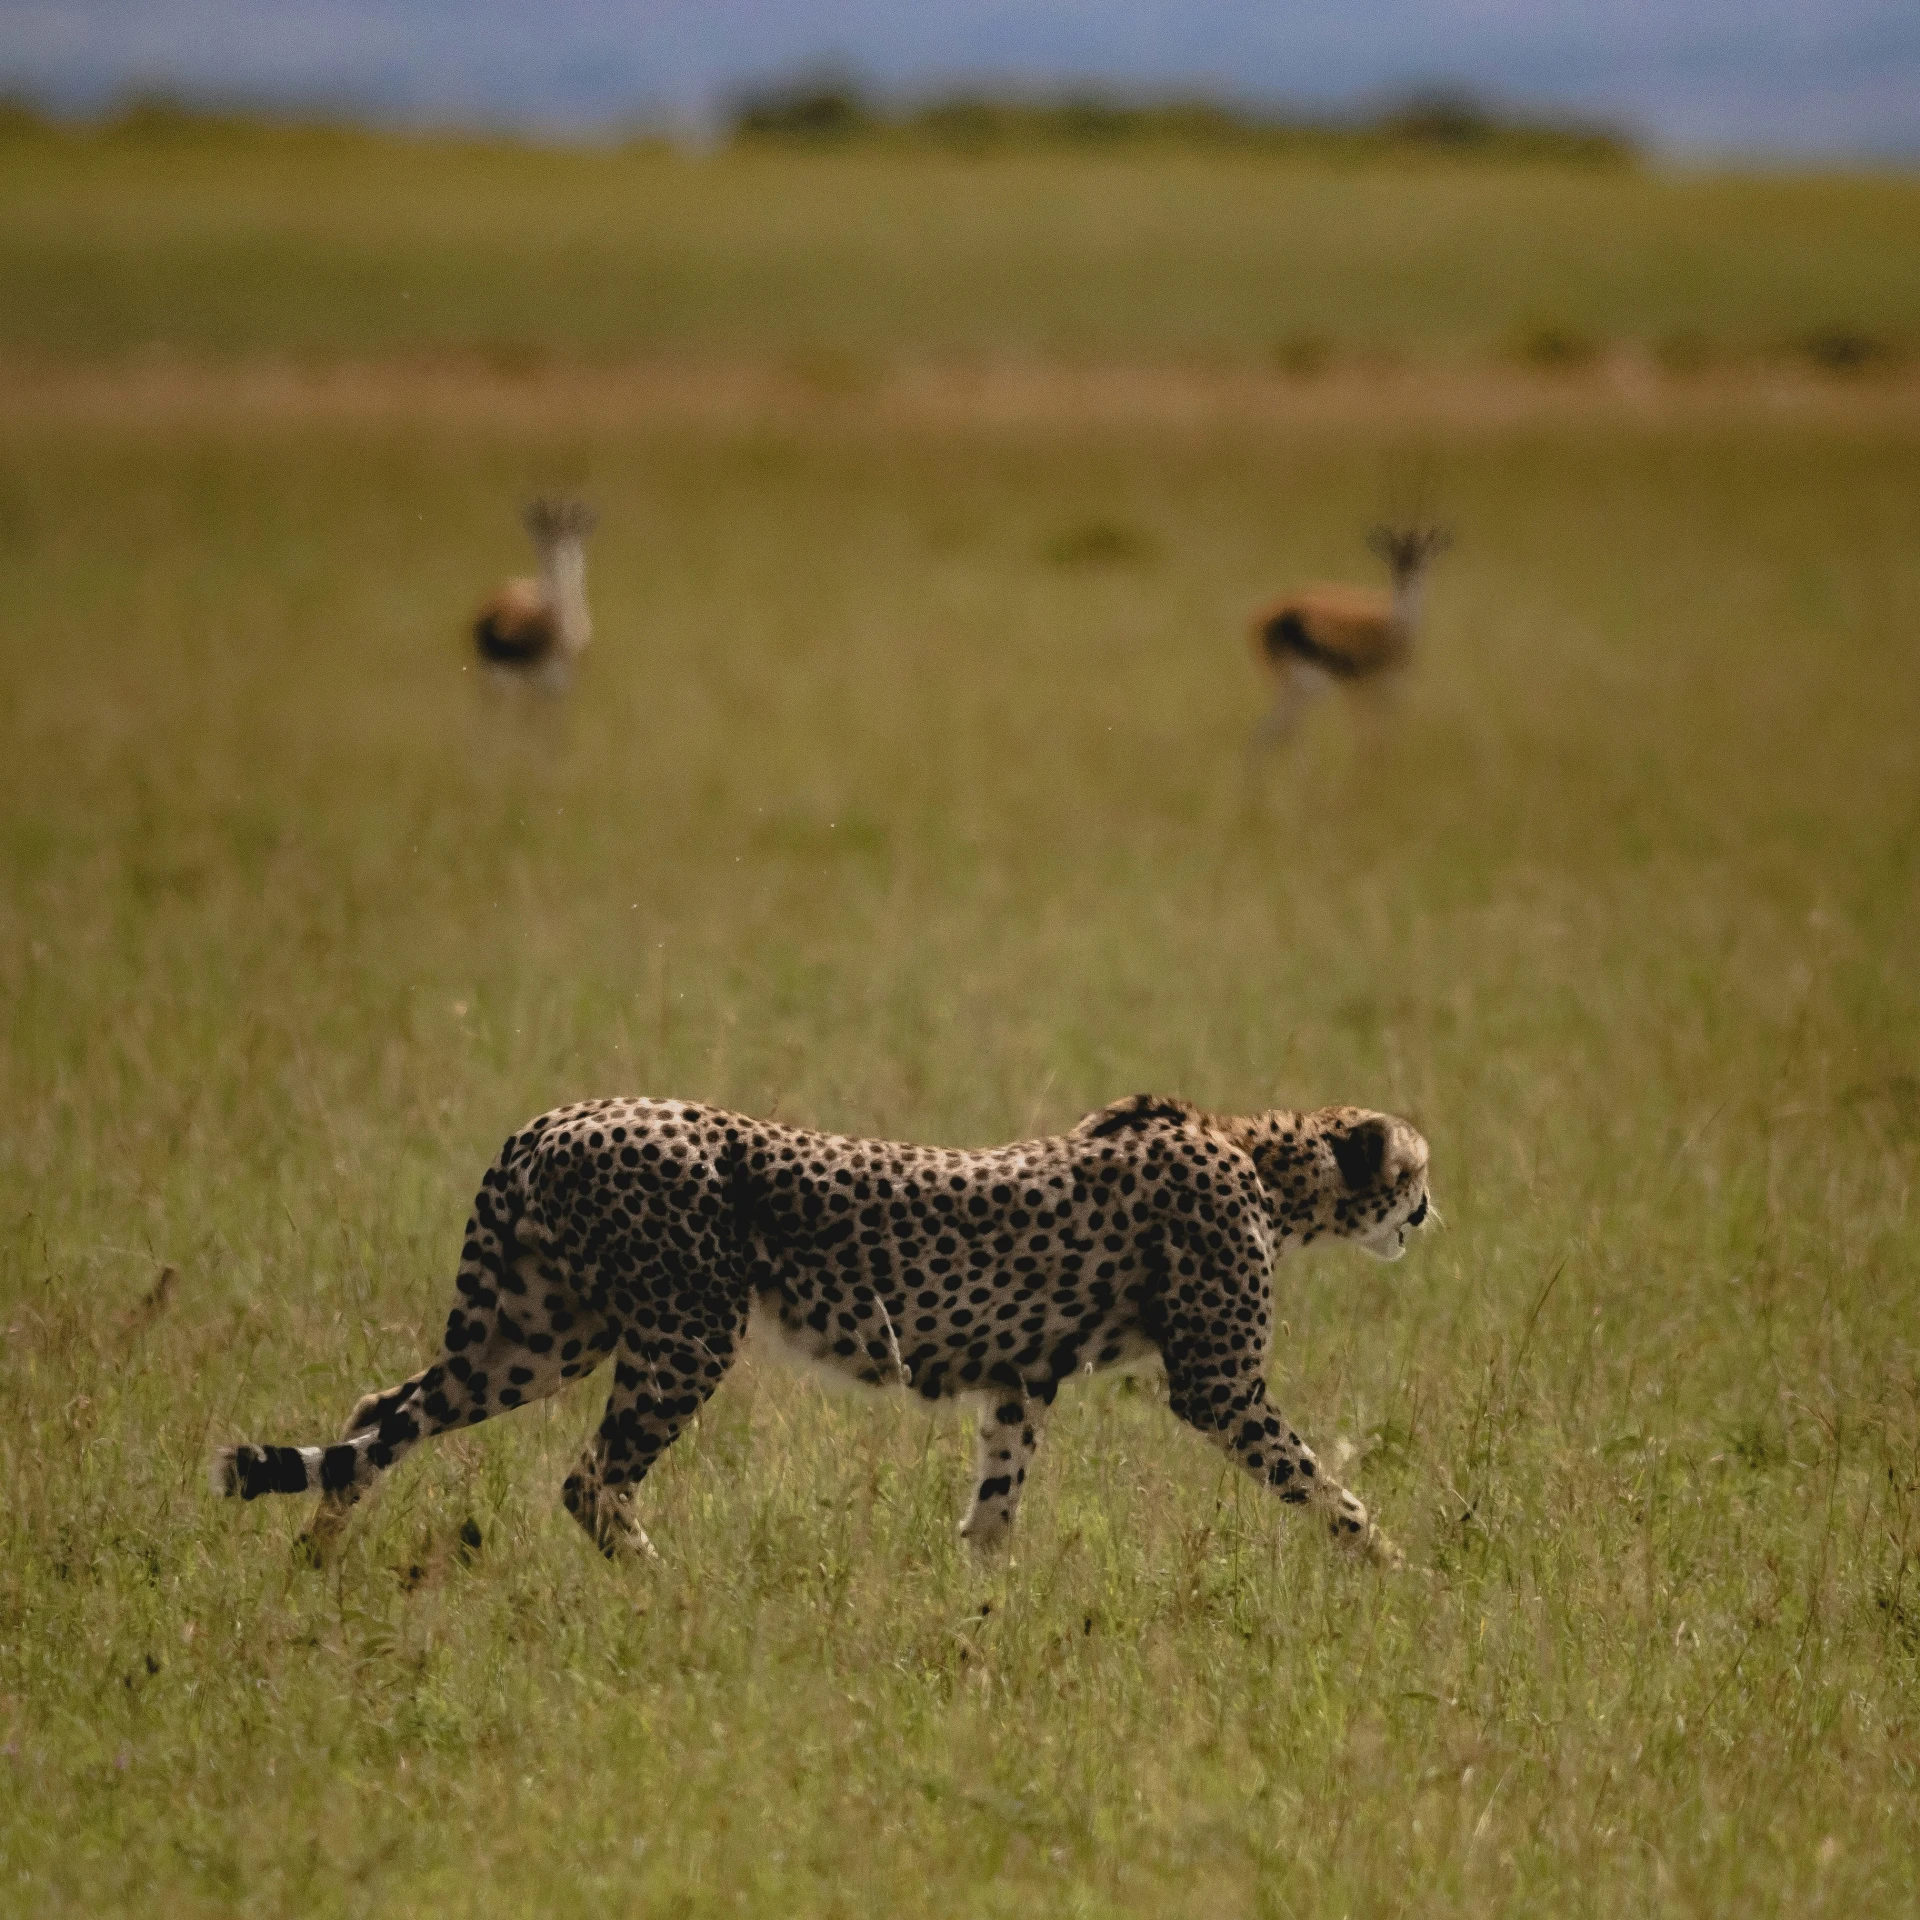 a cheetah in grassy area next to some birds